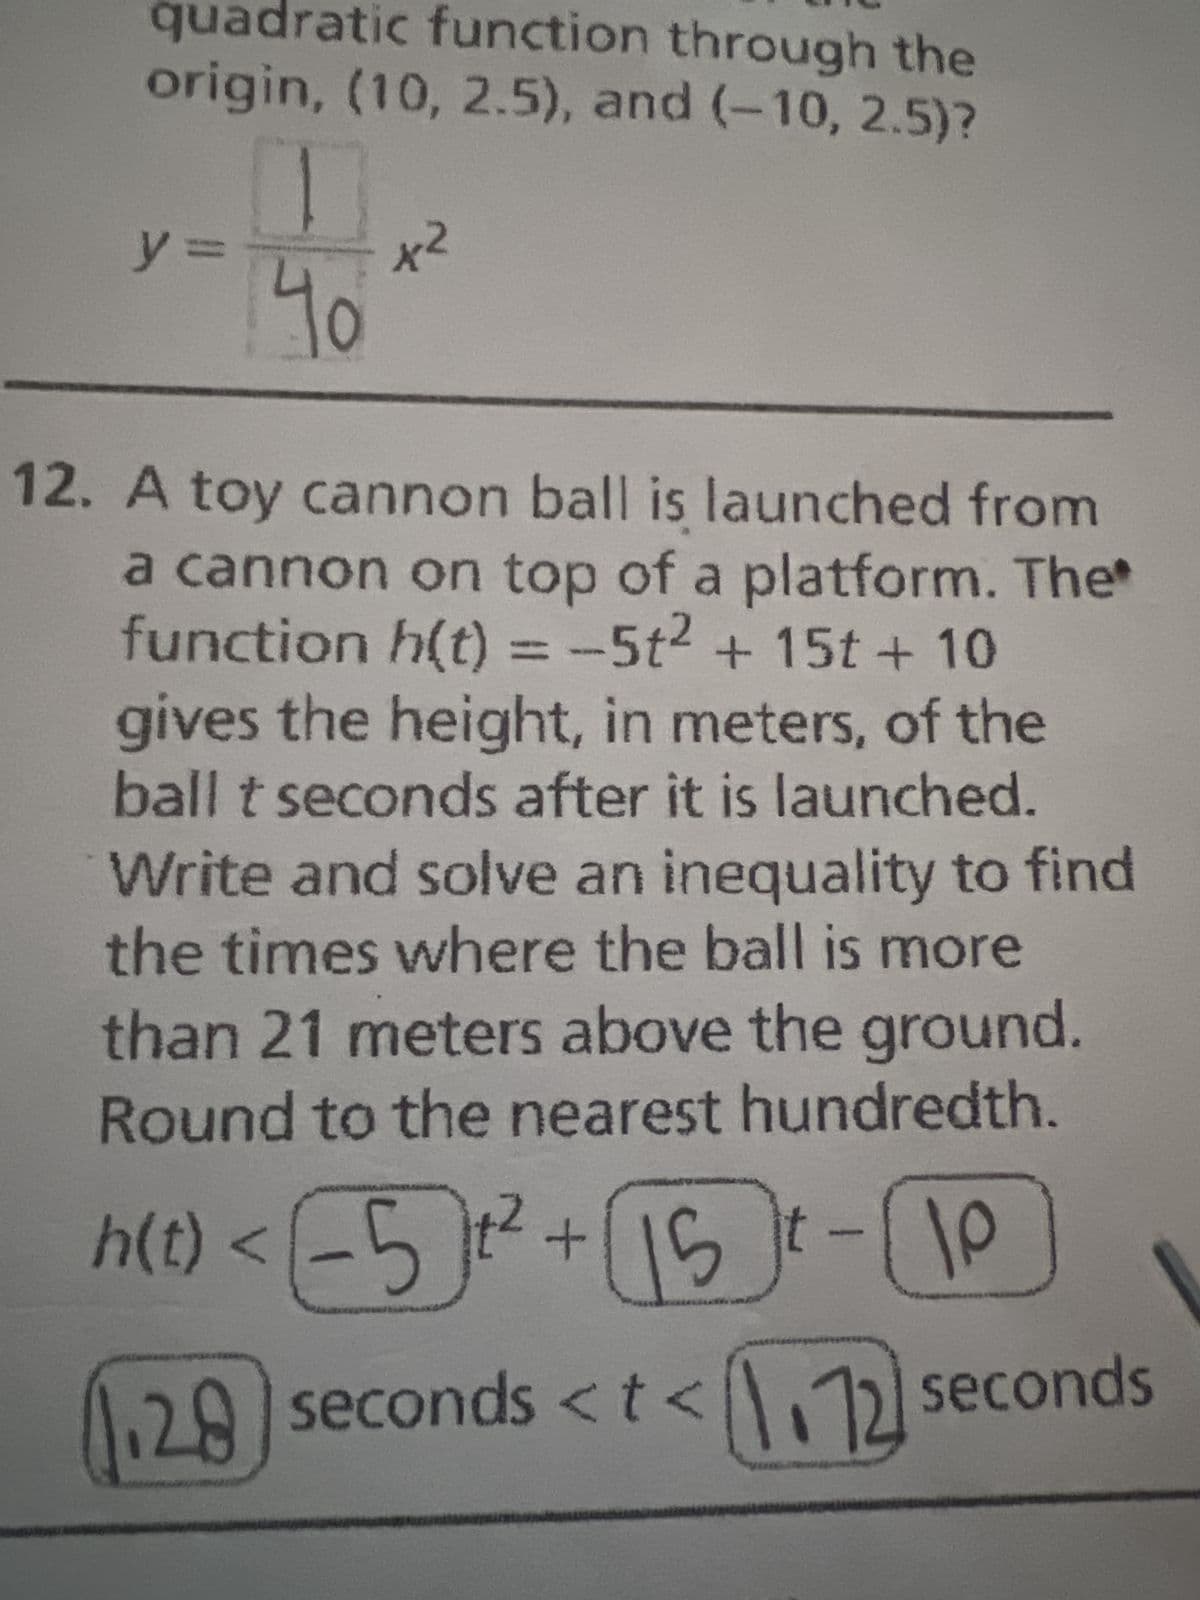 quadratic function through the
origin, (10, 2.5), and (-10, 2.5)?
y=
40
x²
12. A toy cannon ball is launched from
a cannon on top of a platform. The
function h(t) = -5t² + 15t + 10
gives the height, in meters, of the
ball t seconds after it is launched.
Write and solve an inequality to find
the times where the ball is more
than 21 meters above the ground.
Round to the nearest hundredth.
h(t) < (5]t² + [15]t-(10
28 seconds <t<72 seconds